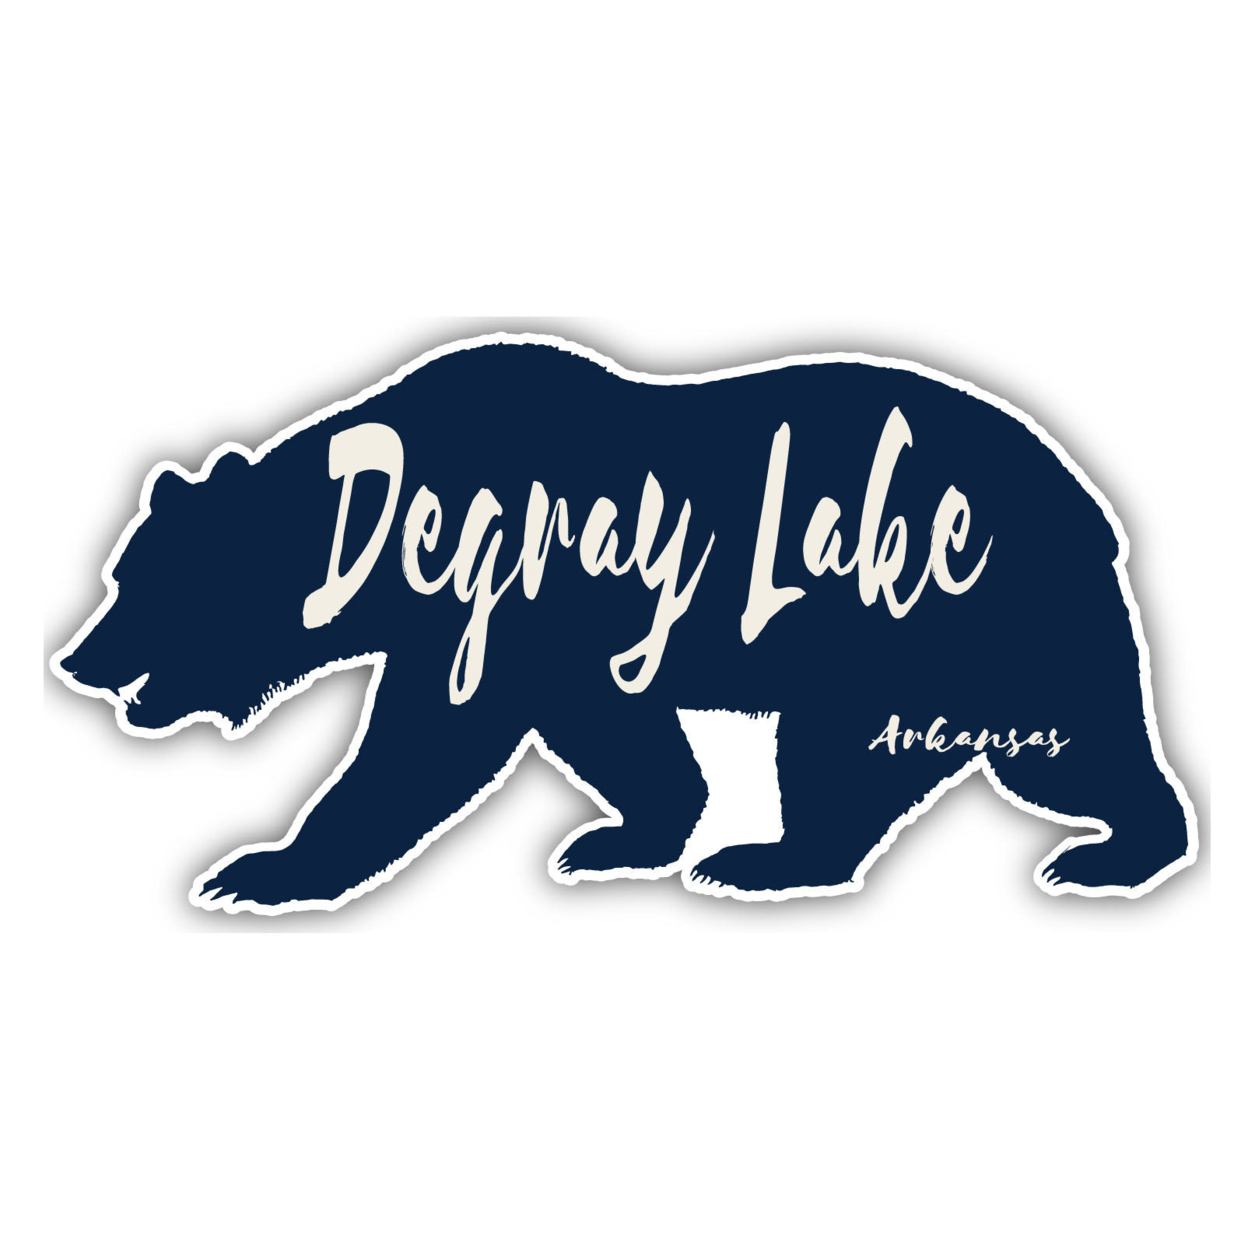 DeGray Lake Arkansas Souvenir Decorative Stickers (Choose Theme And Size) - 4-Pack, 2-Inch, Camp Life